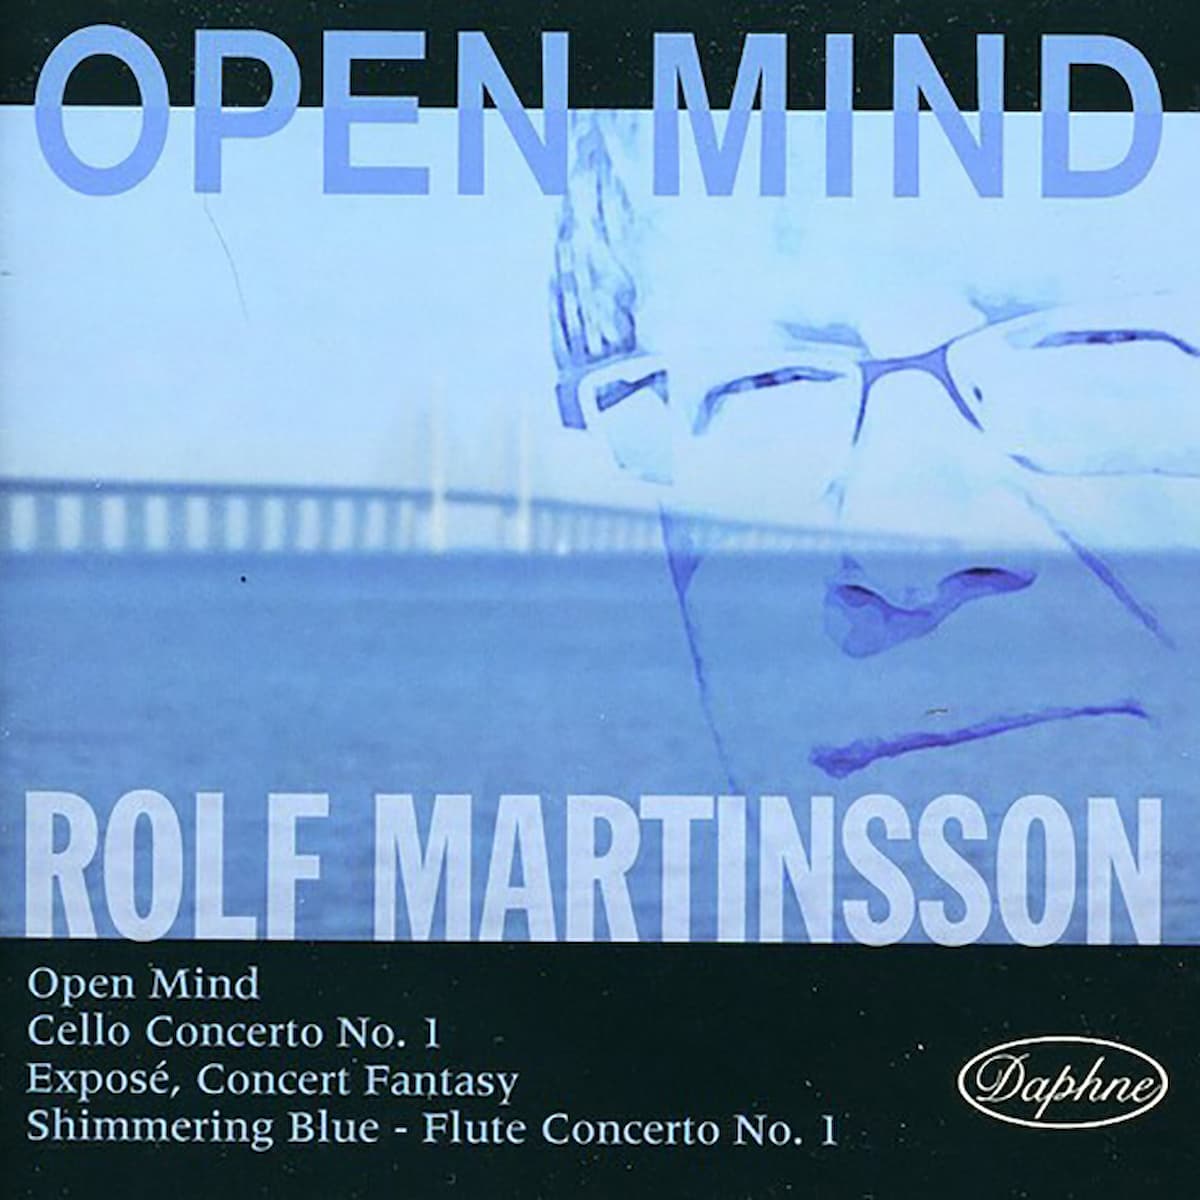 Record cover artwork for OPEN MIND